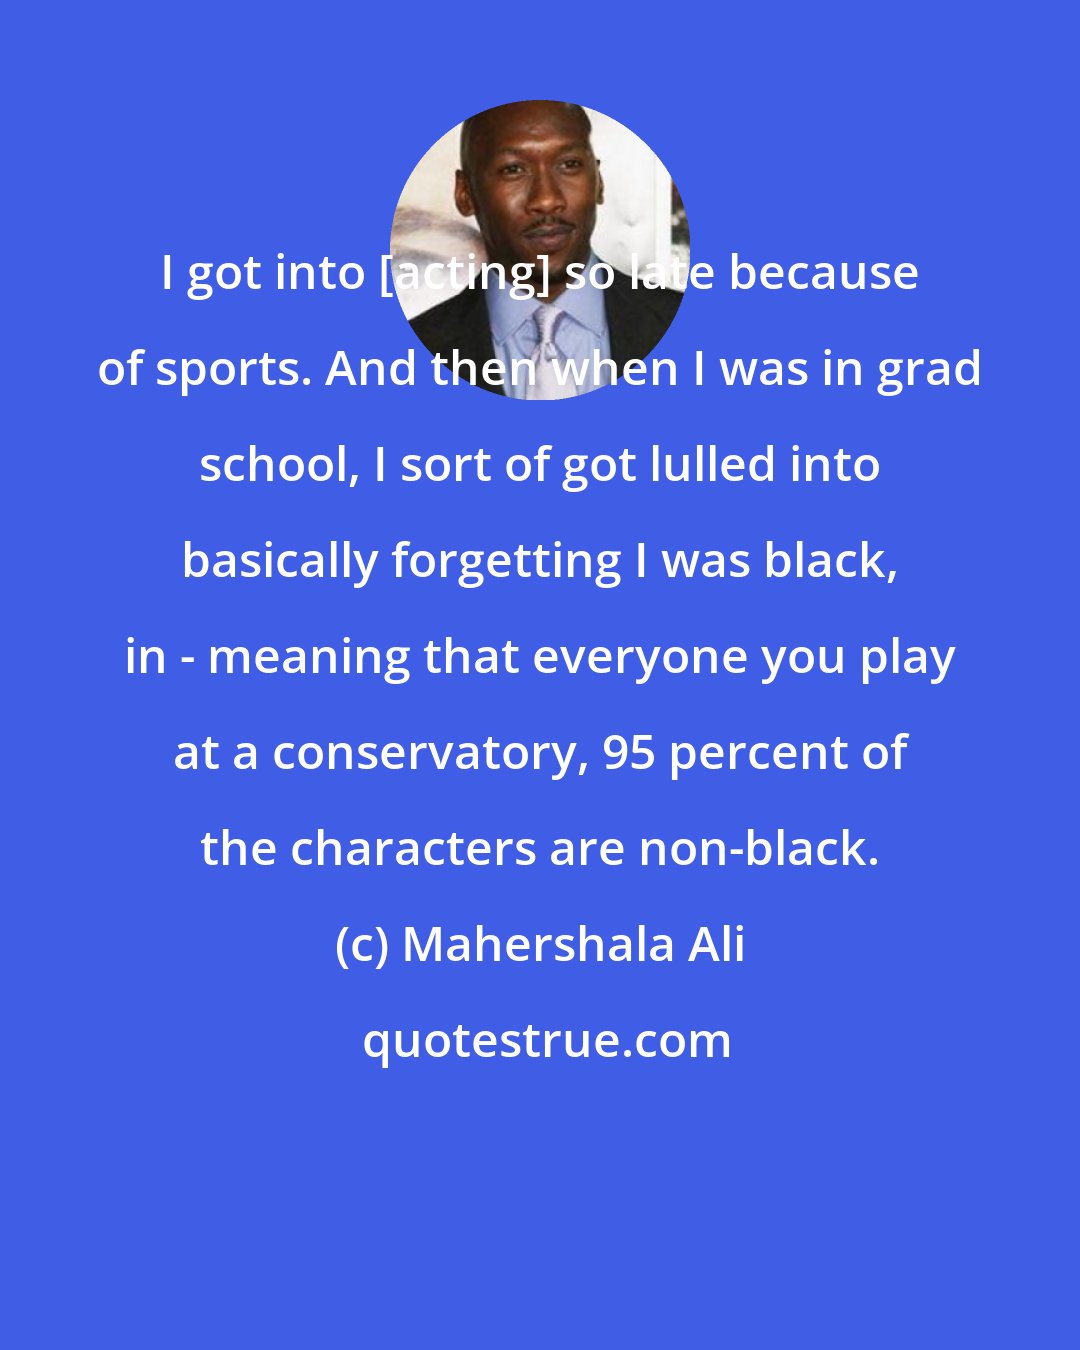 Mahershala Ali: I got into [acting] so late because of sports. And then when I was in grad school, I sort of got lulled into basically forgetting I was black, in - meaning that everyone you play at a conservatory, 95 percent of the characters are non-black.